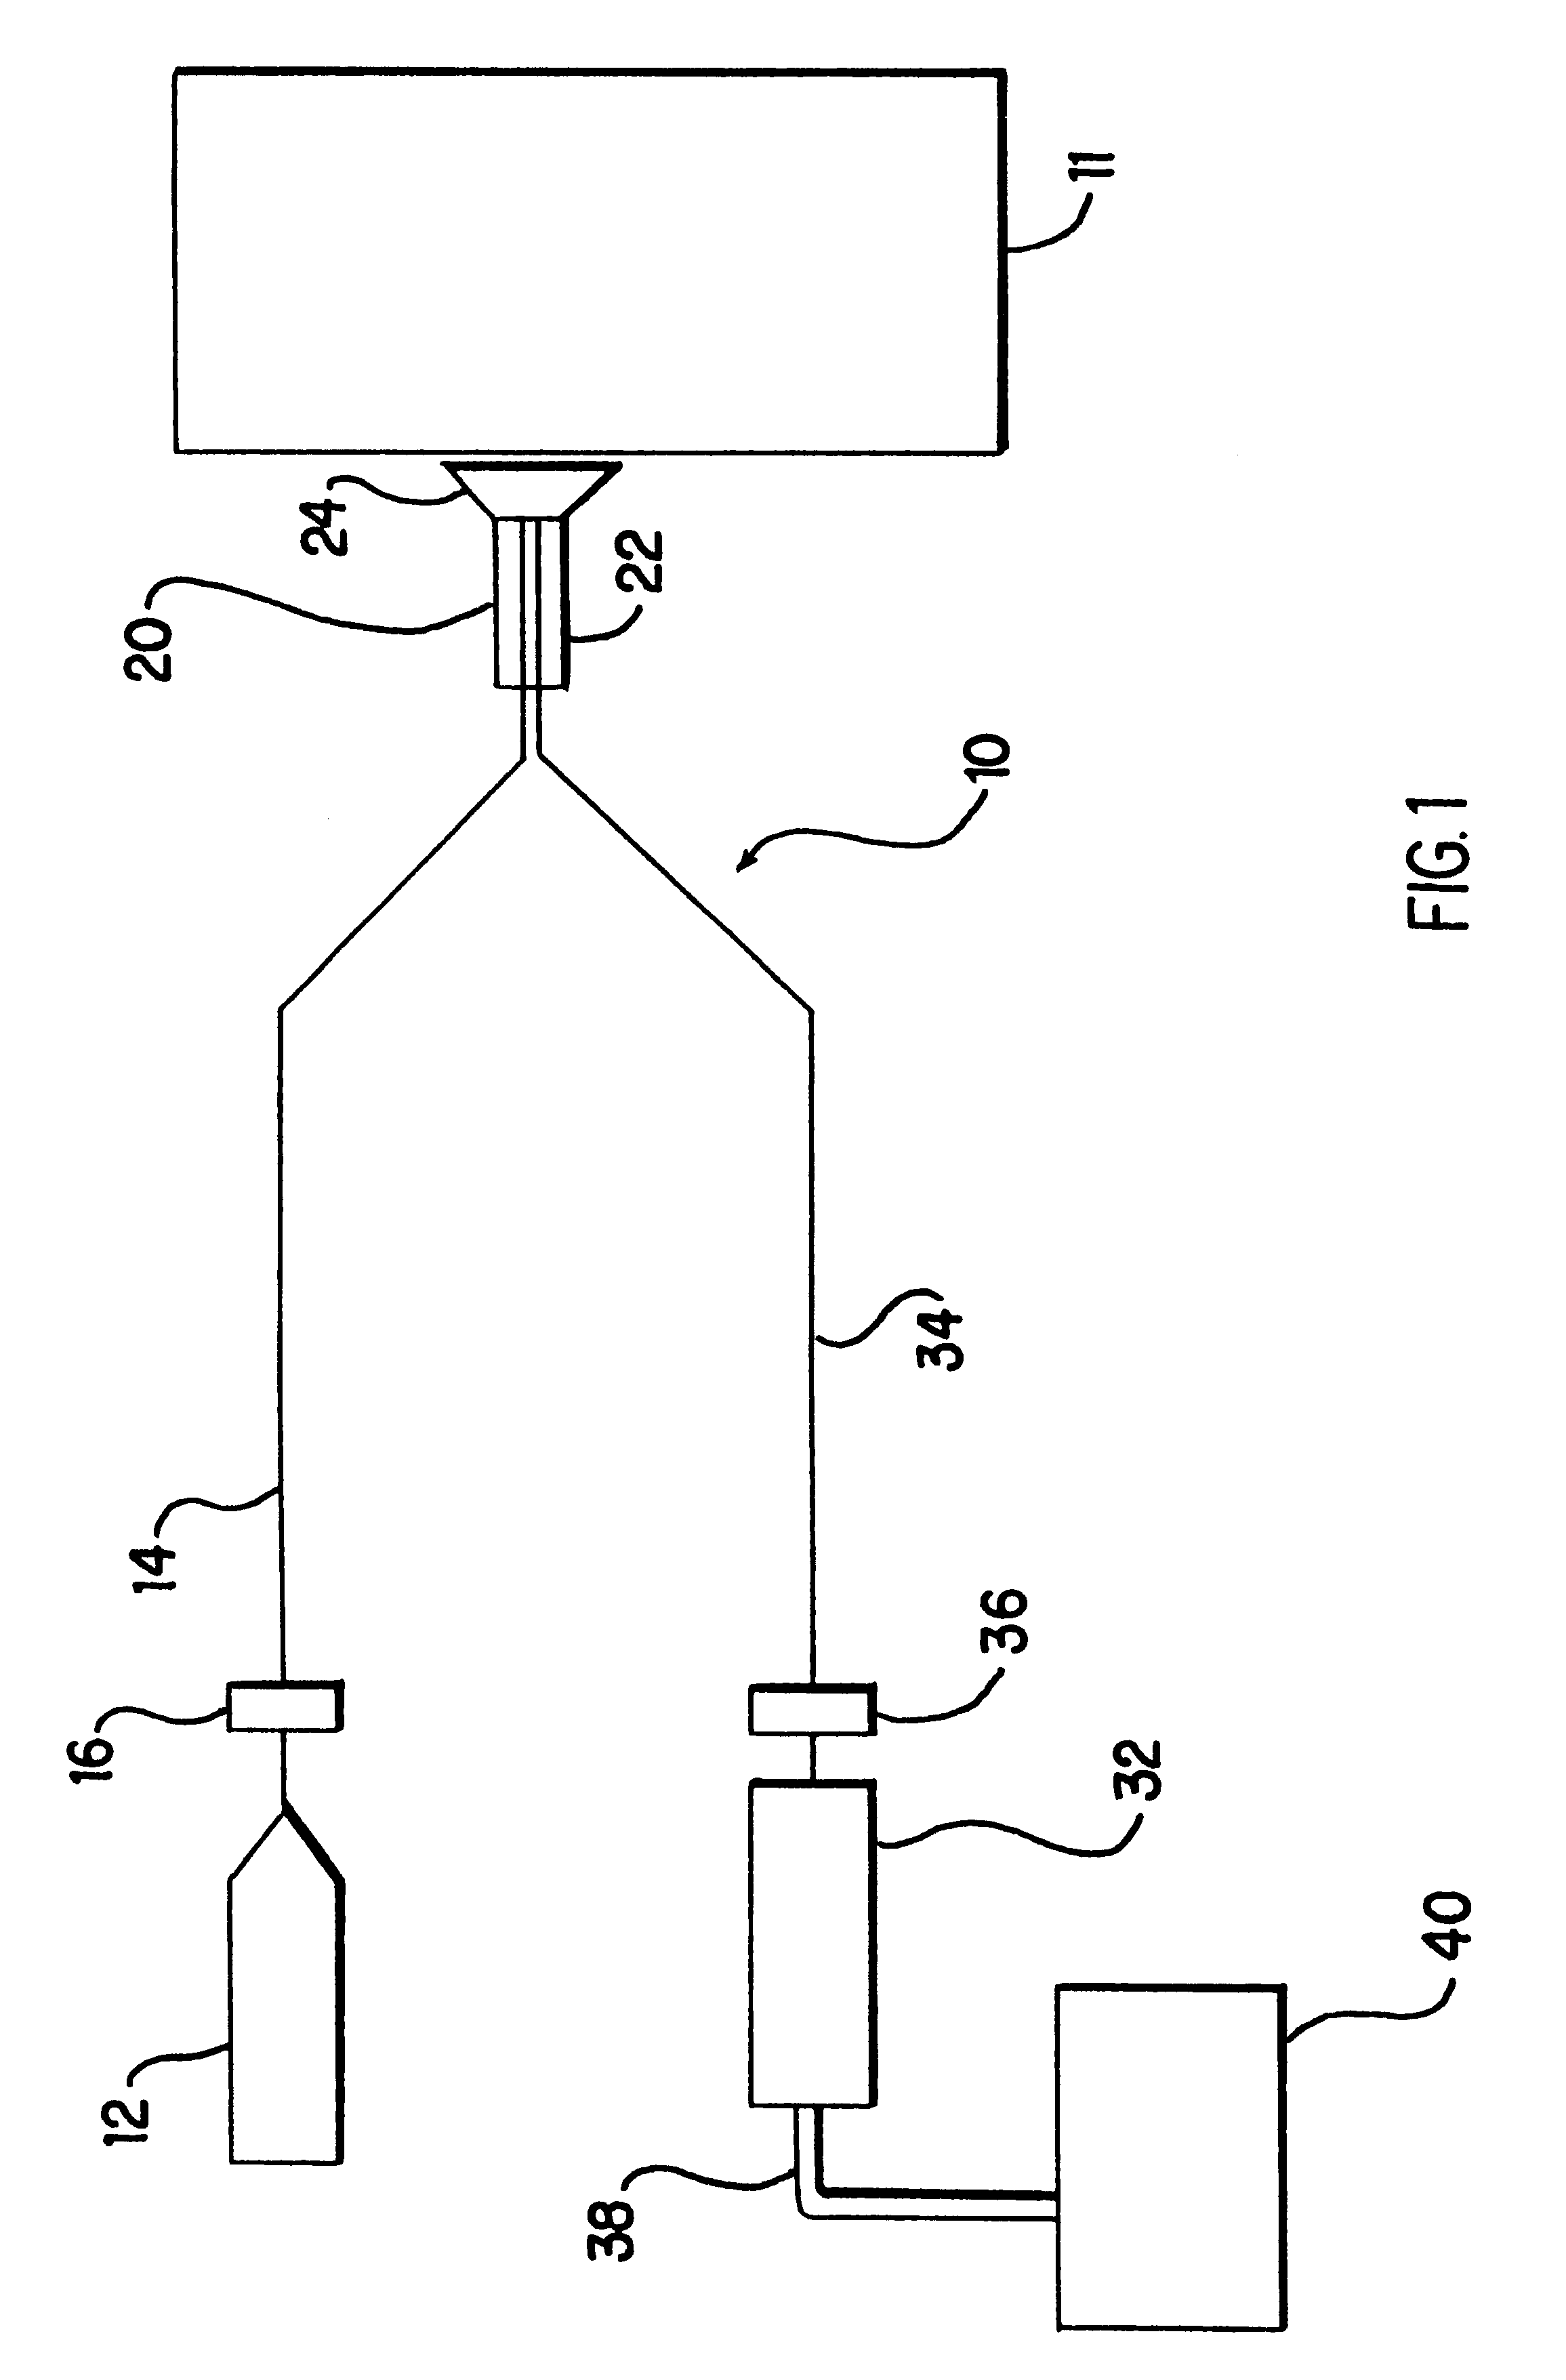 Method of determining authenticity of a packaged product